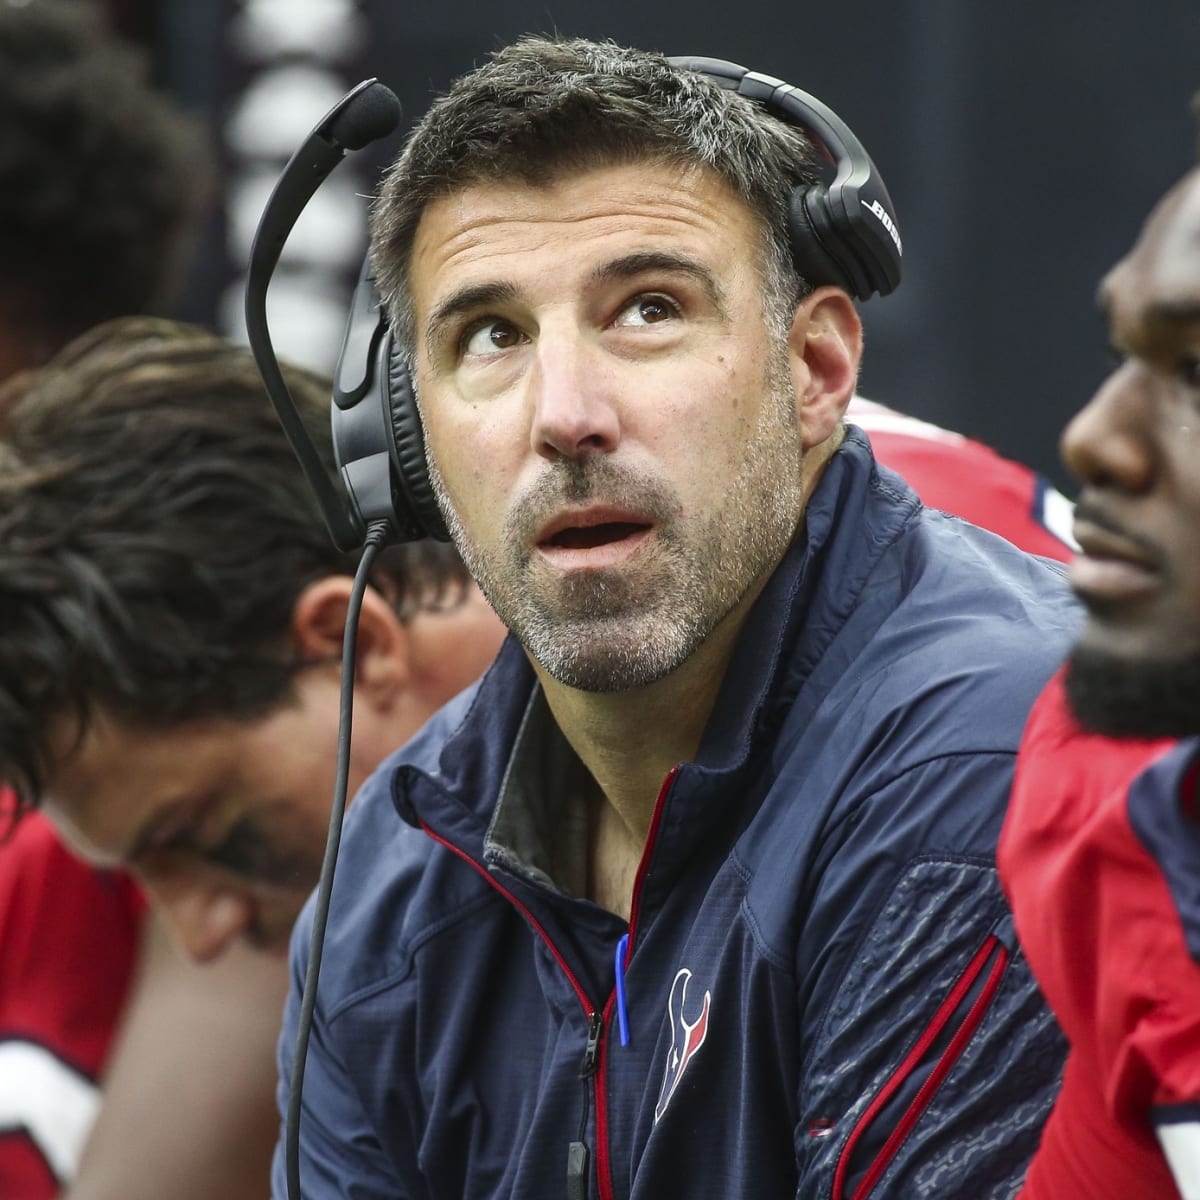 Titans coach Mike Vrabel knows a lot about Texans, and vice versa